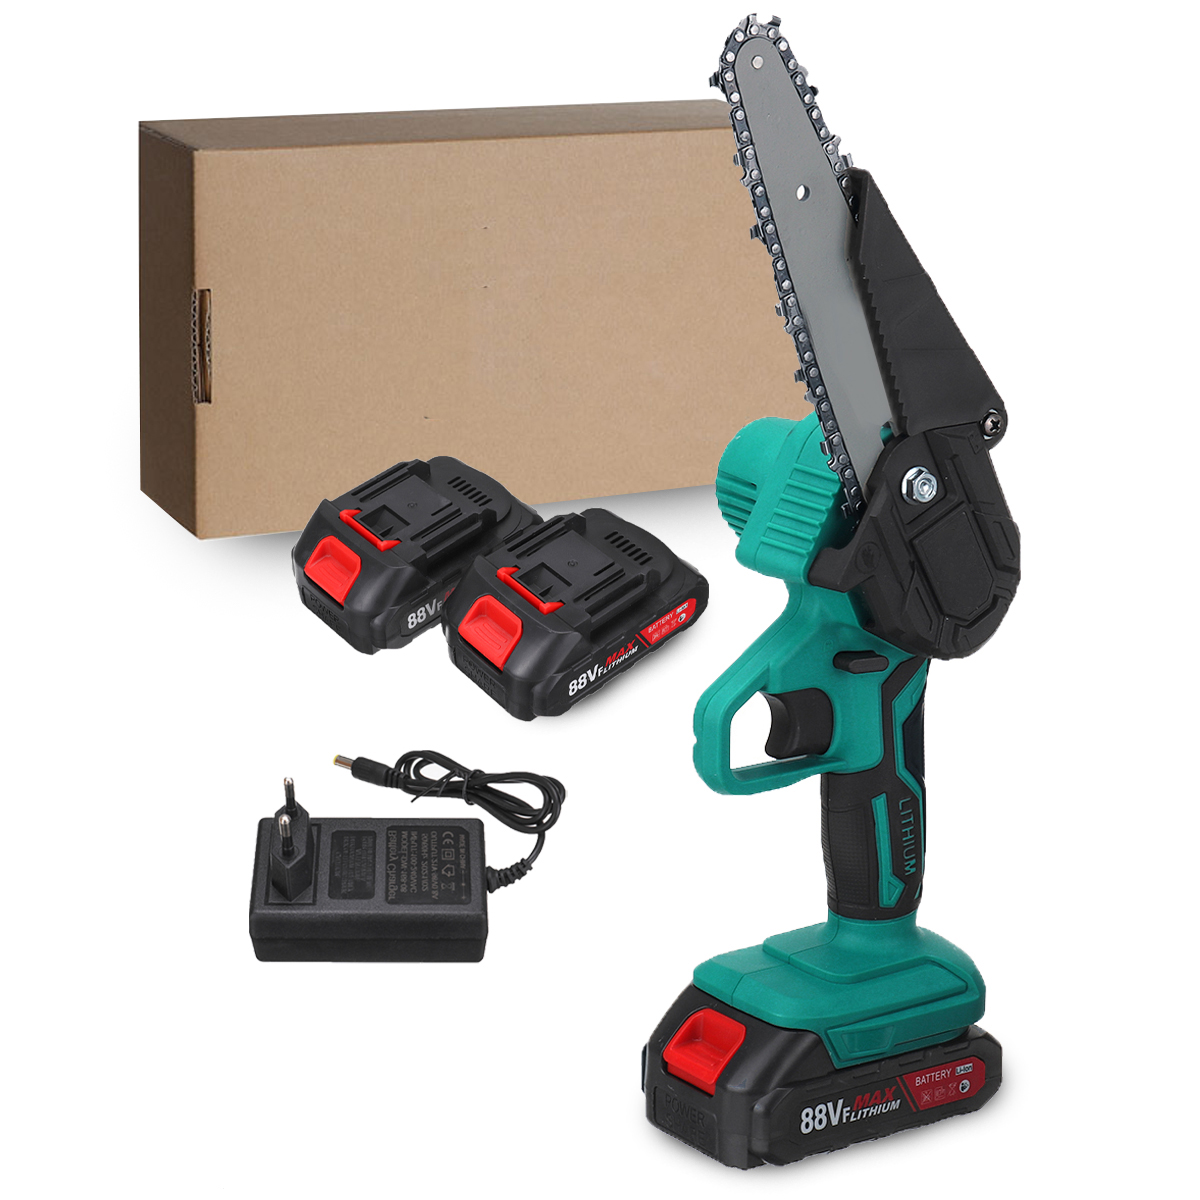 88VF-6-Inch-1200W-Electric-Chain-Saw-Pruning-Chainsaw-Cordless-Woodworking-Garden-Tree-Logging-Tool--1859896-13